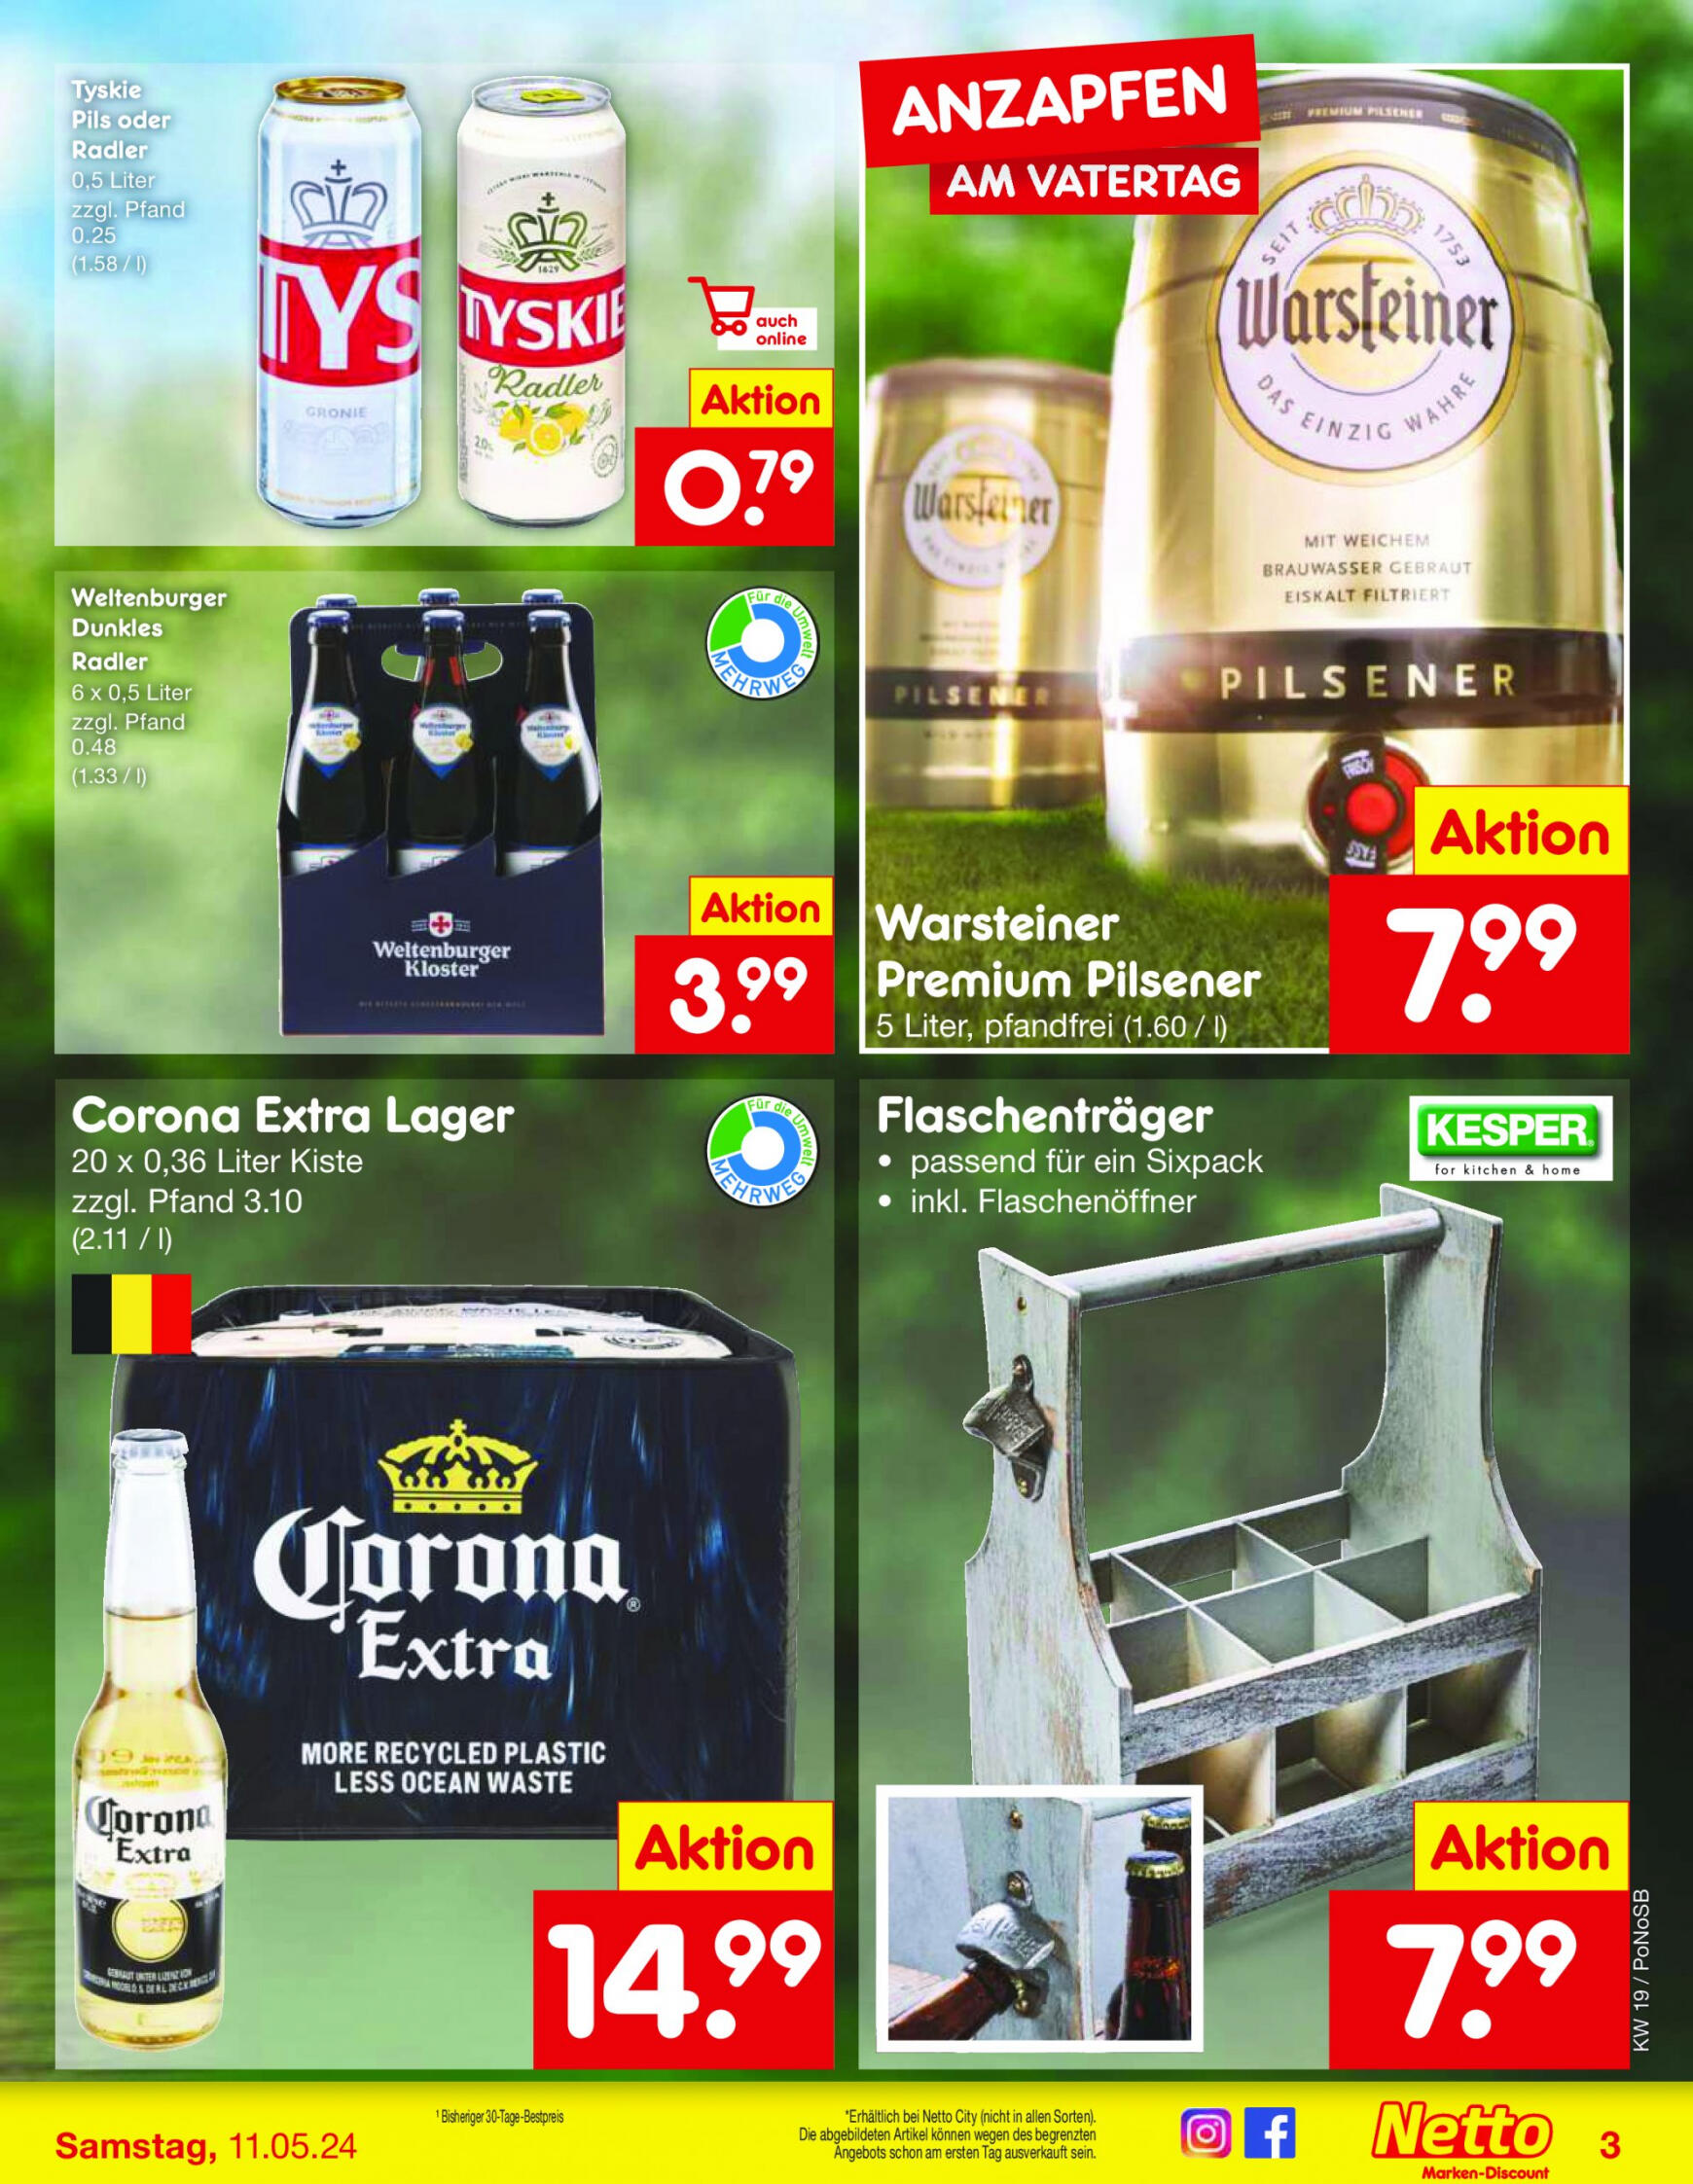 netto - Flyer Netto aktuell 06.05. - 11.05. - page: 21